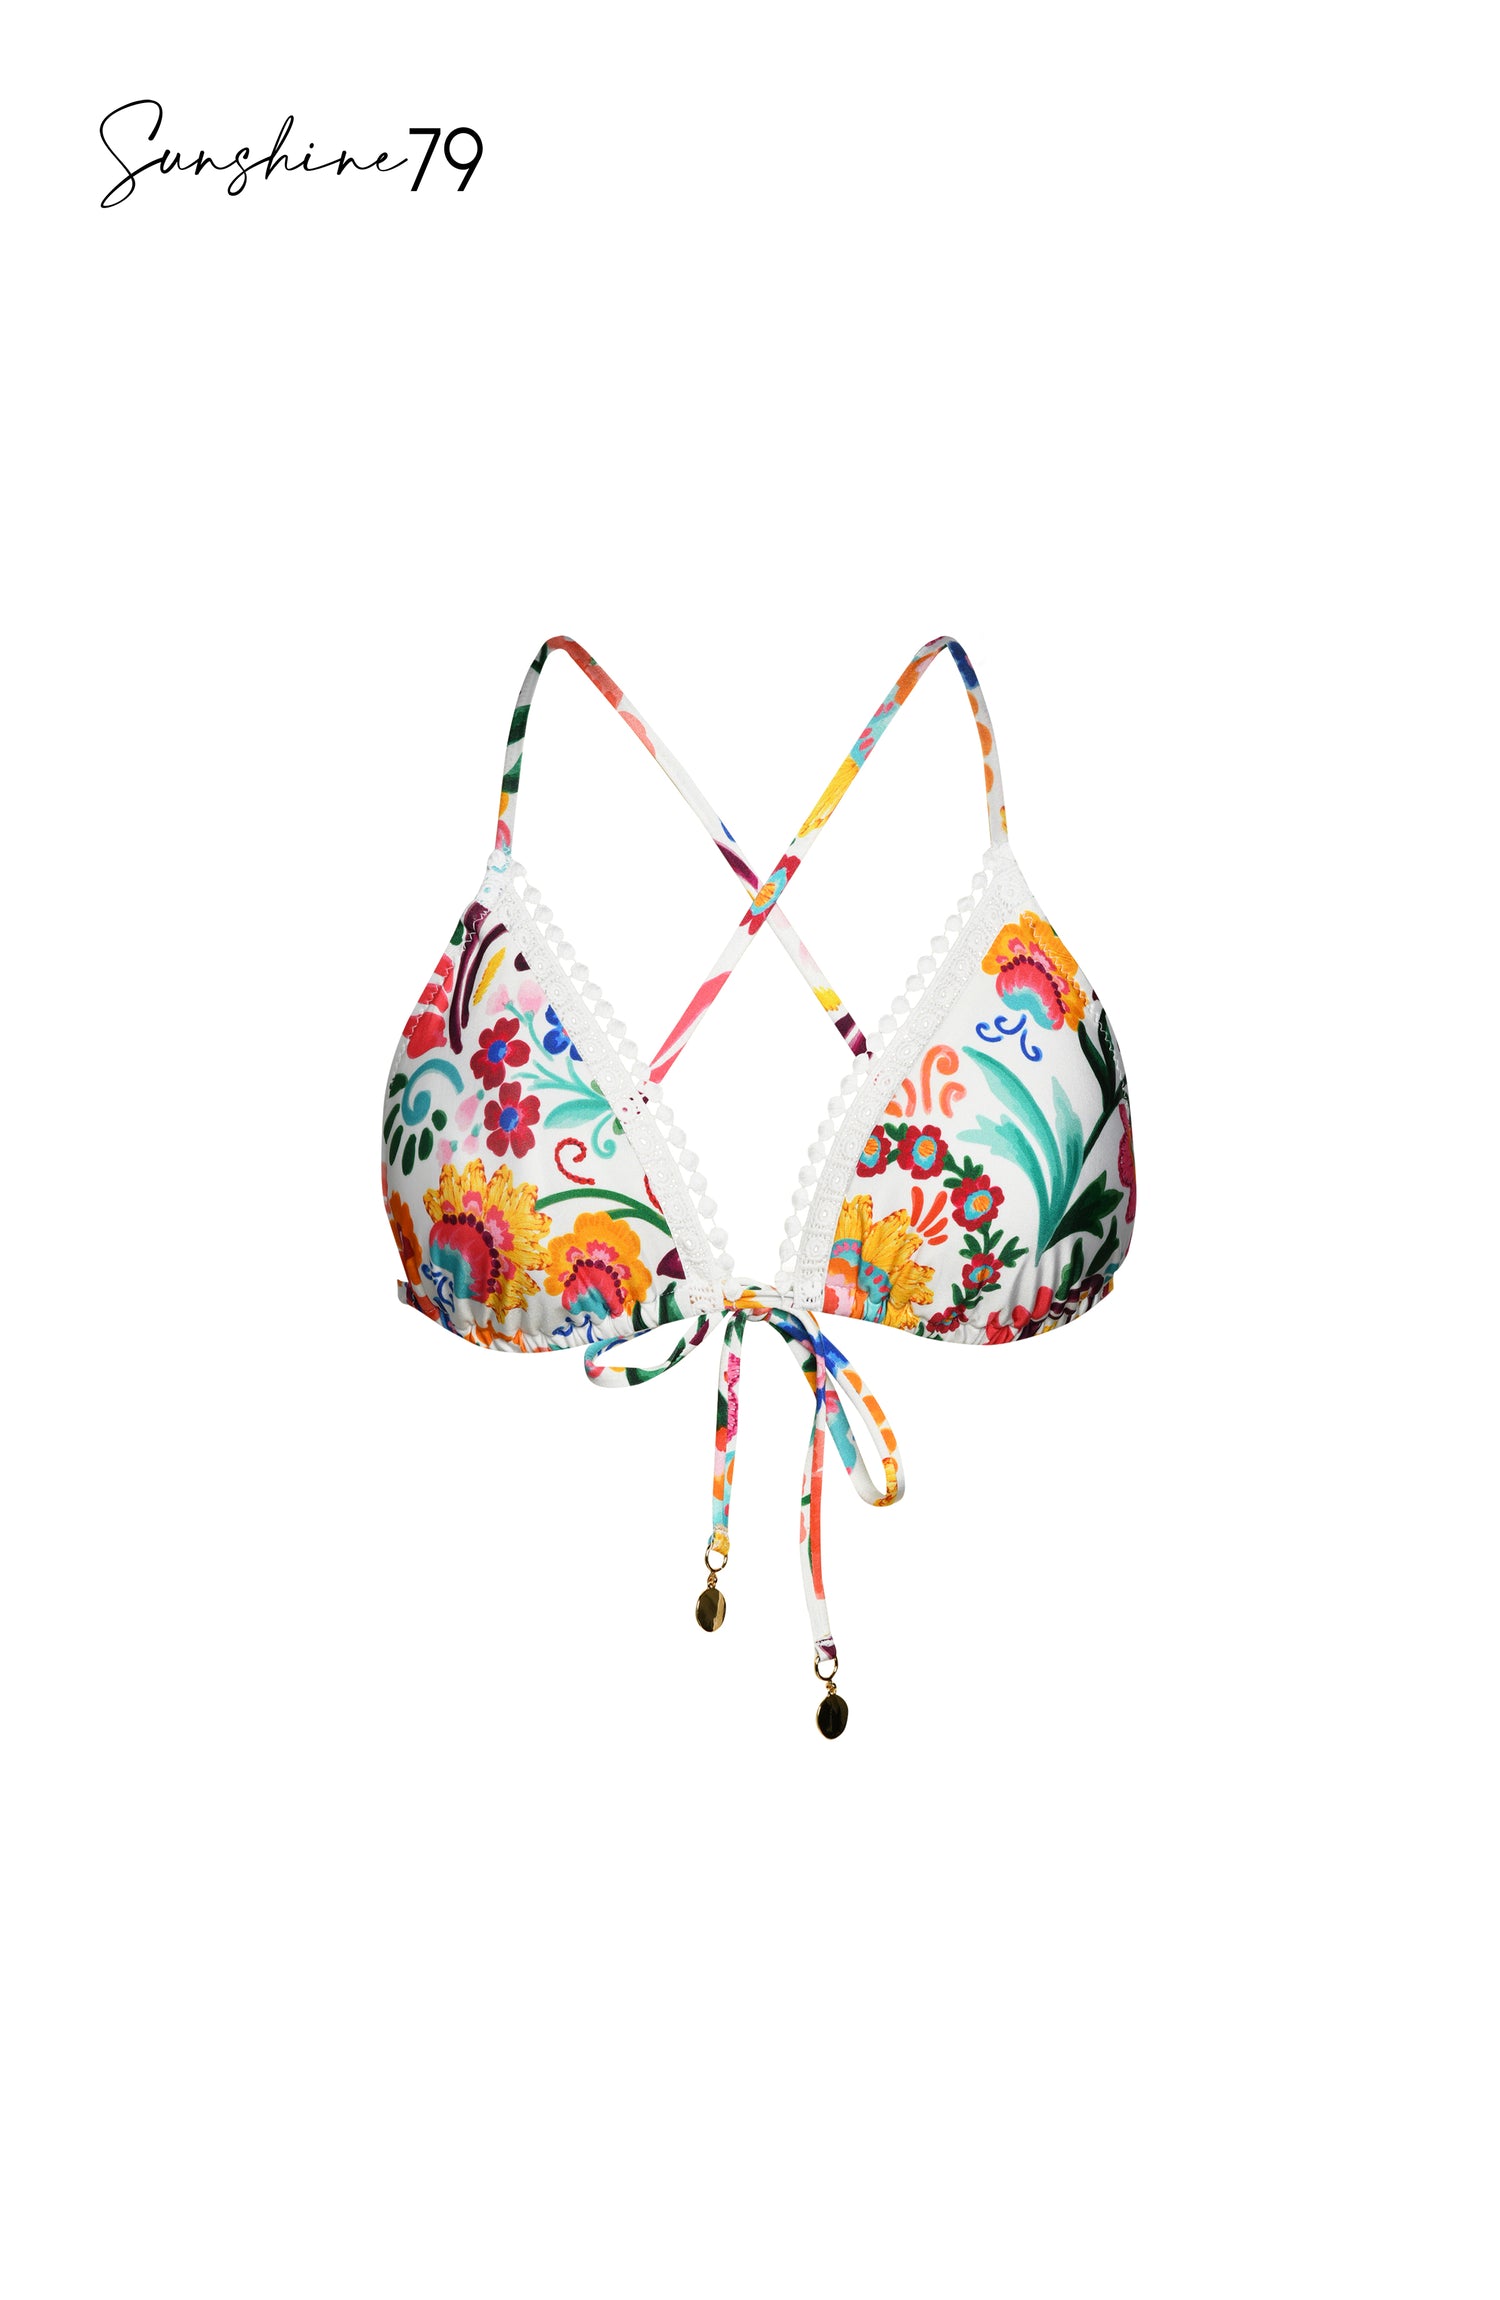 Model is wearing a multicolored spanish inspired printed halter triangle bikini top from our Sunshine 79 brand.